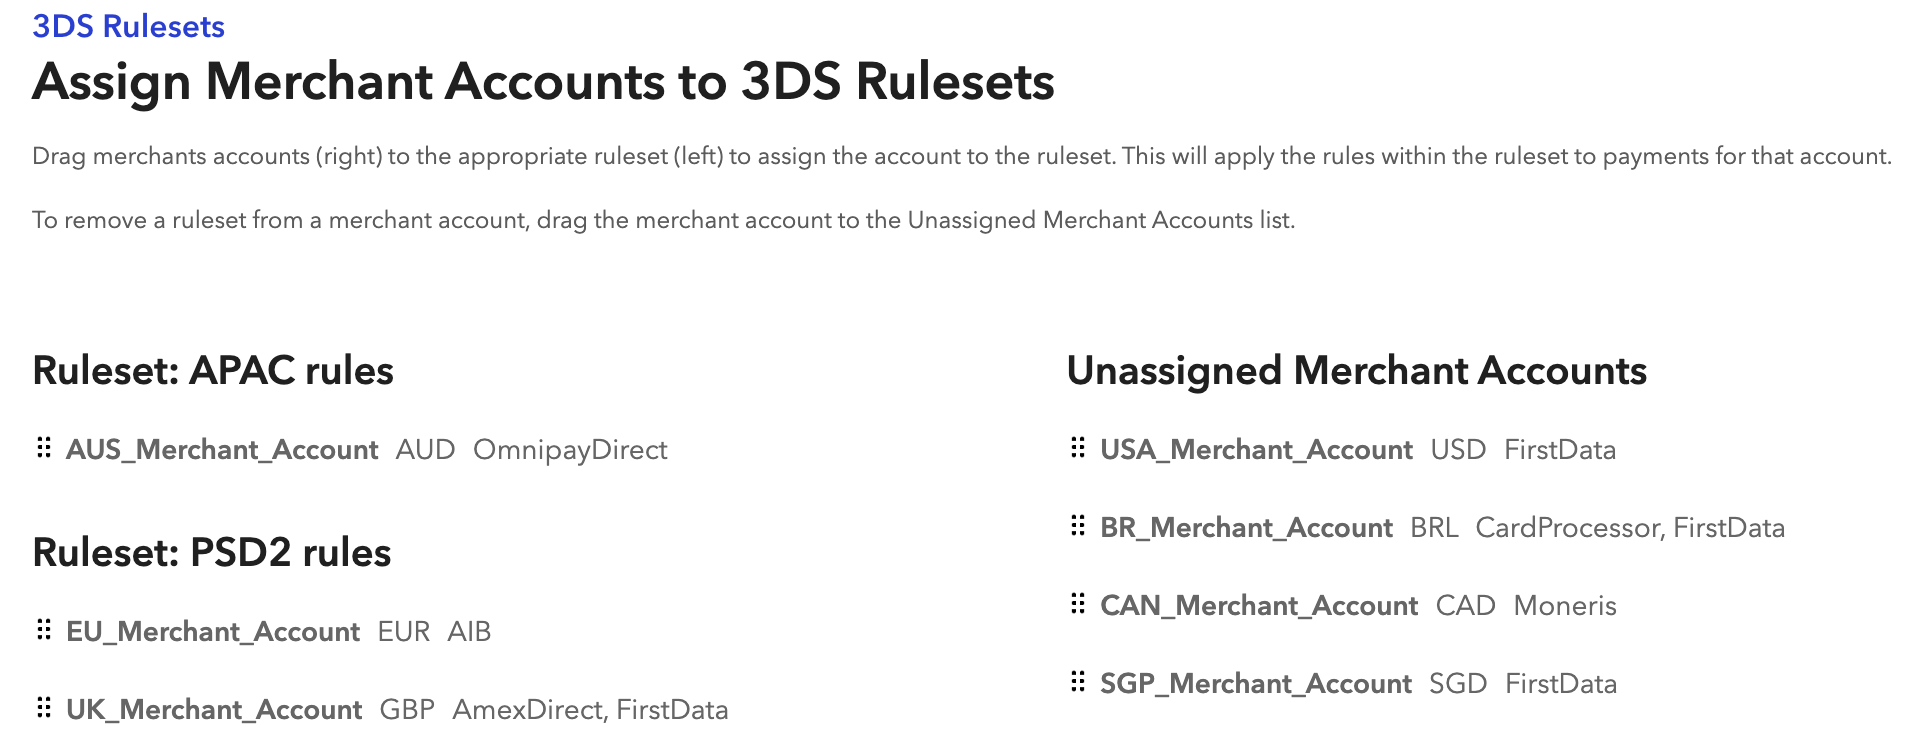 3DS Rulesets Assignment